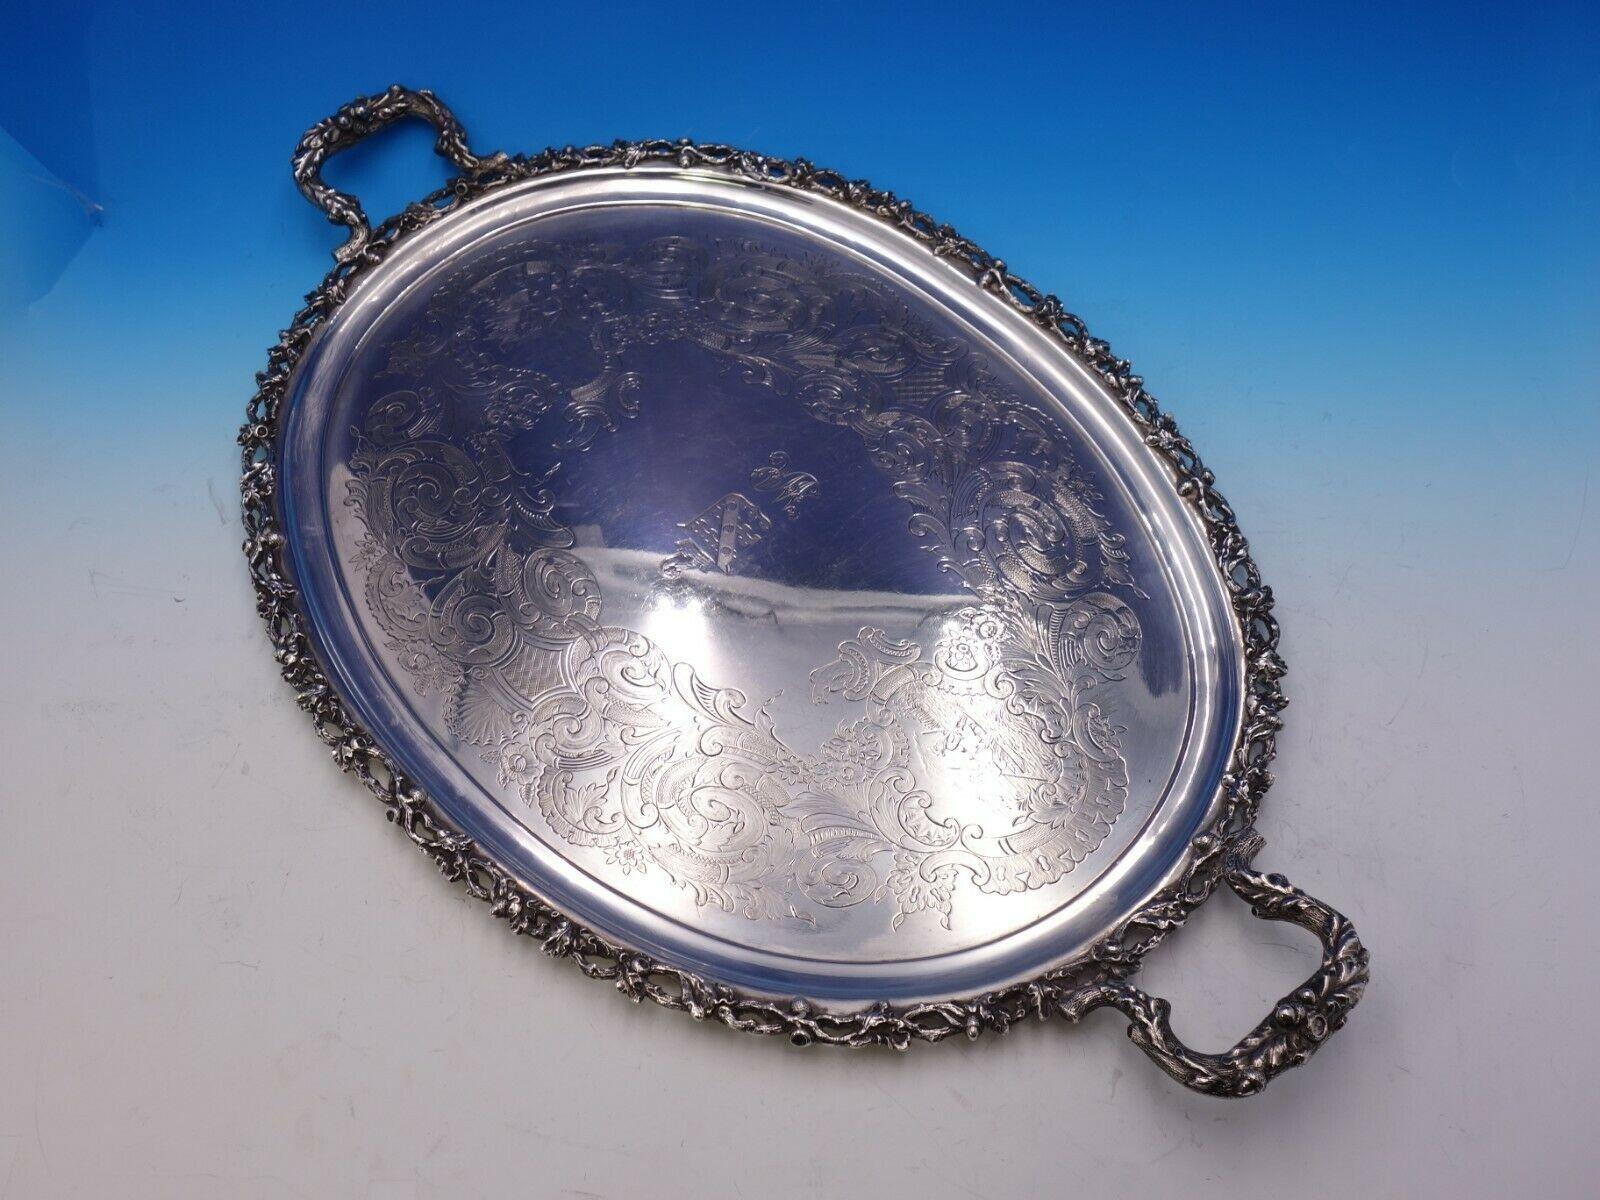 Samuel T. Crosby and Co

Remarkable Samuel T. Crosby and Co of Boston coin silver tea tray dated 1860. The border is cast with pierced branch with oak leaves and acorns. It has an elaborate hand engraved scene with a kneeling man with rifle near